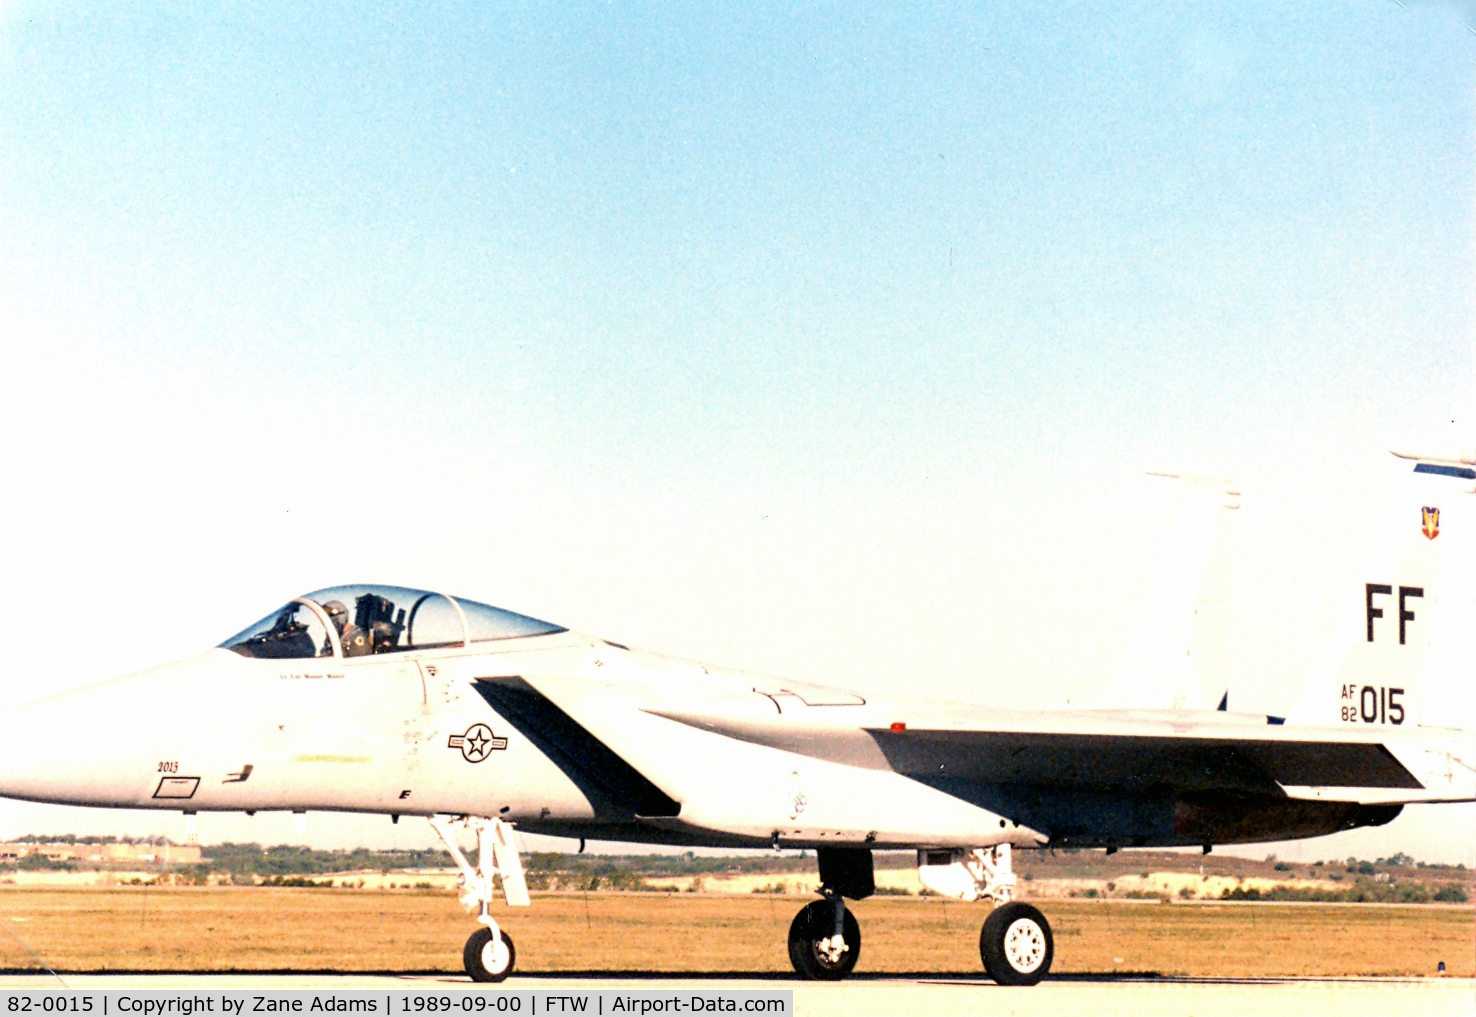 82-0015, 1982 McDonnell Douglas F-15C Eagle C/N 0828/C246, Demo ship at Ft. Worth Airshow 1989